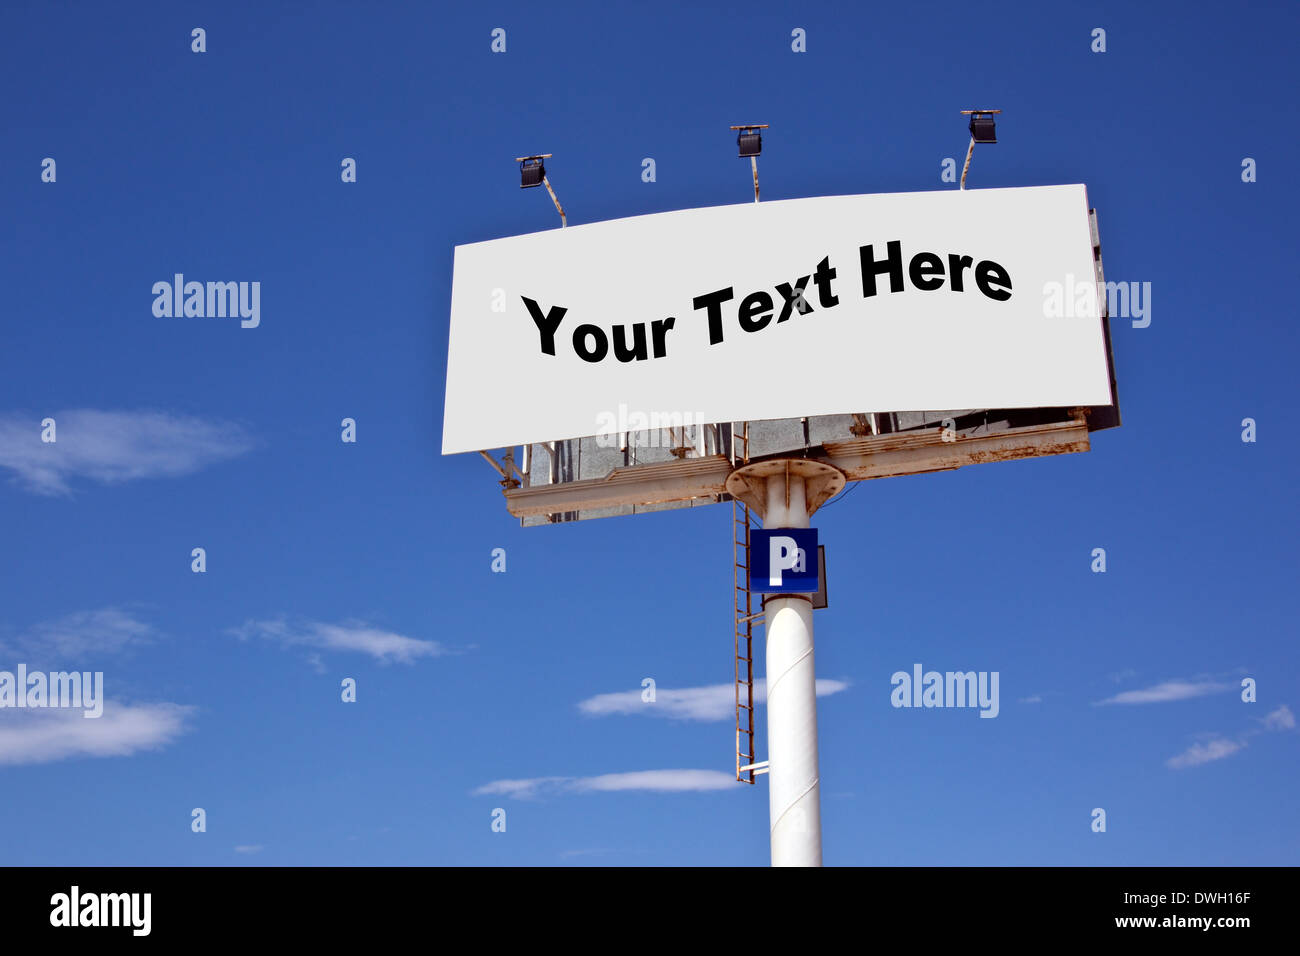 Blank advertising sign - Add your text or image to this space. Stock Photo